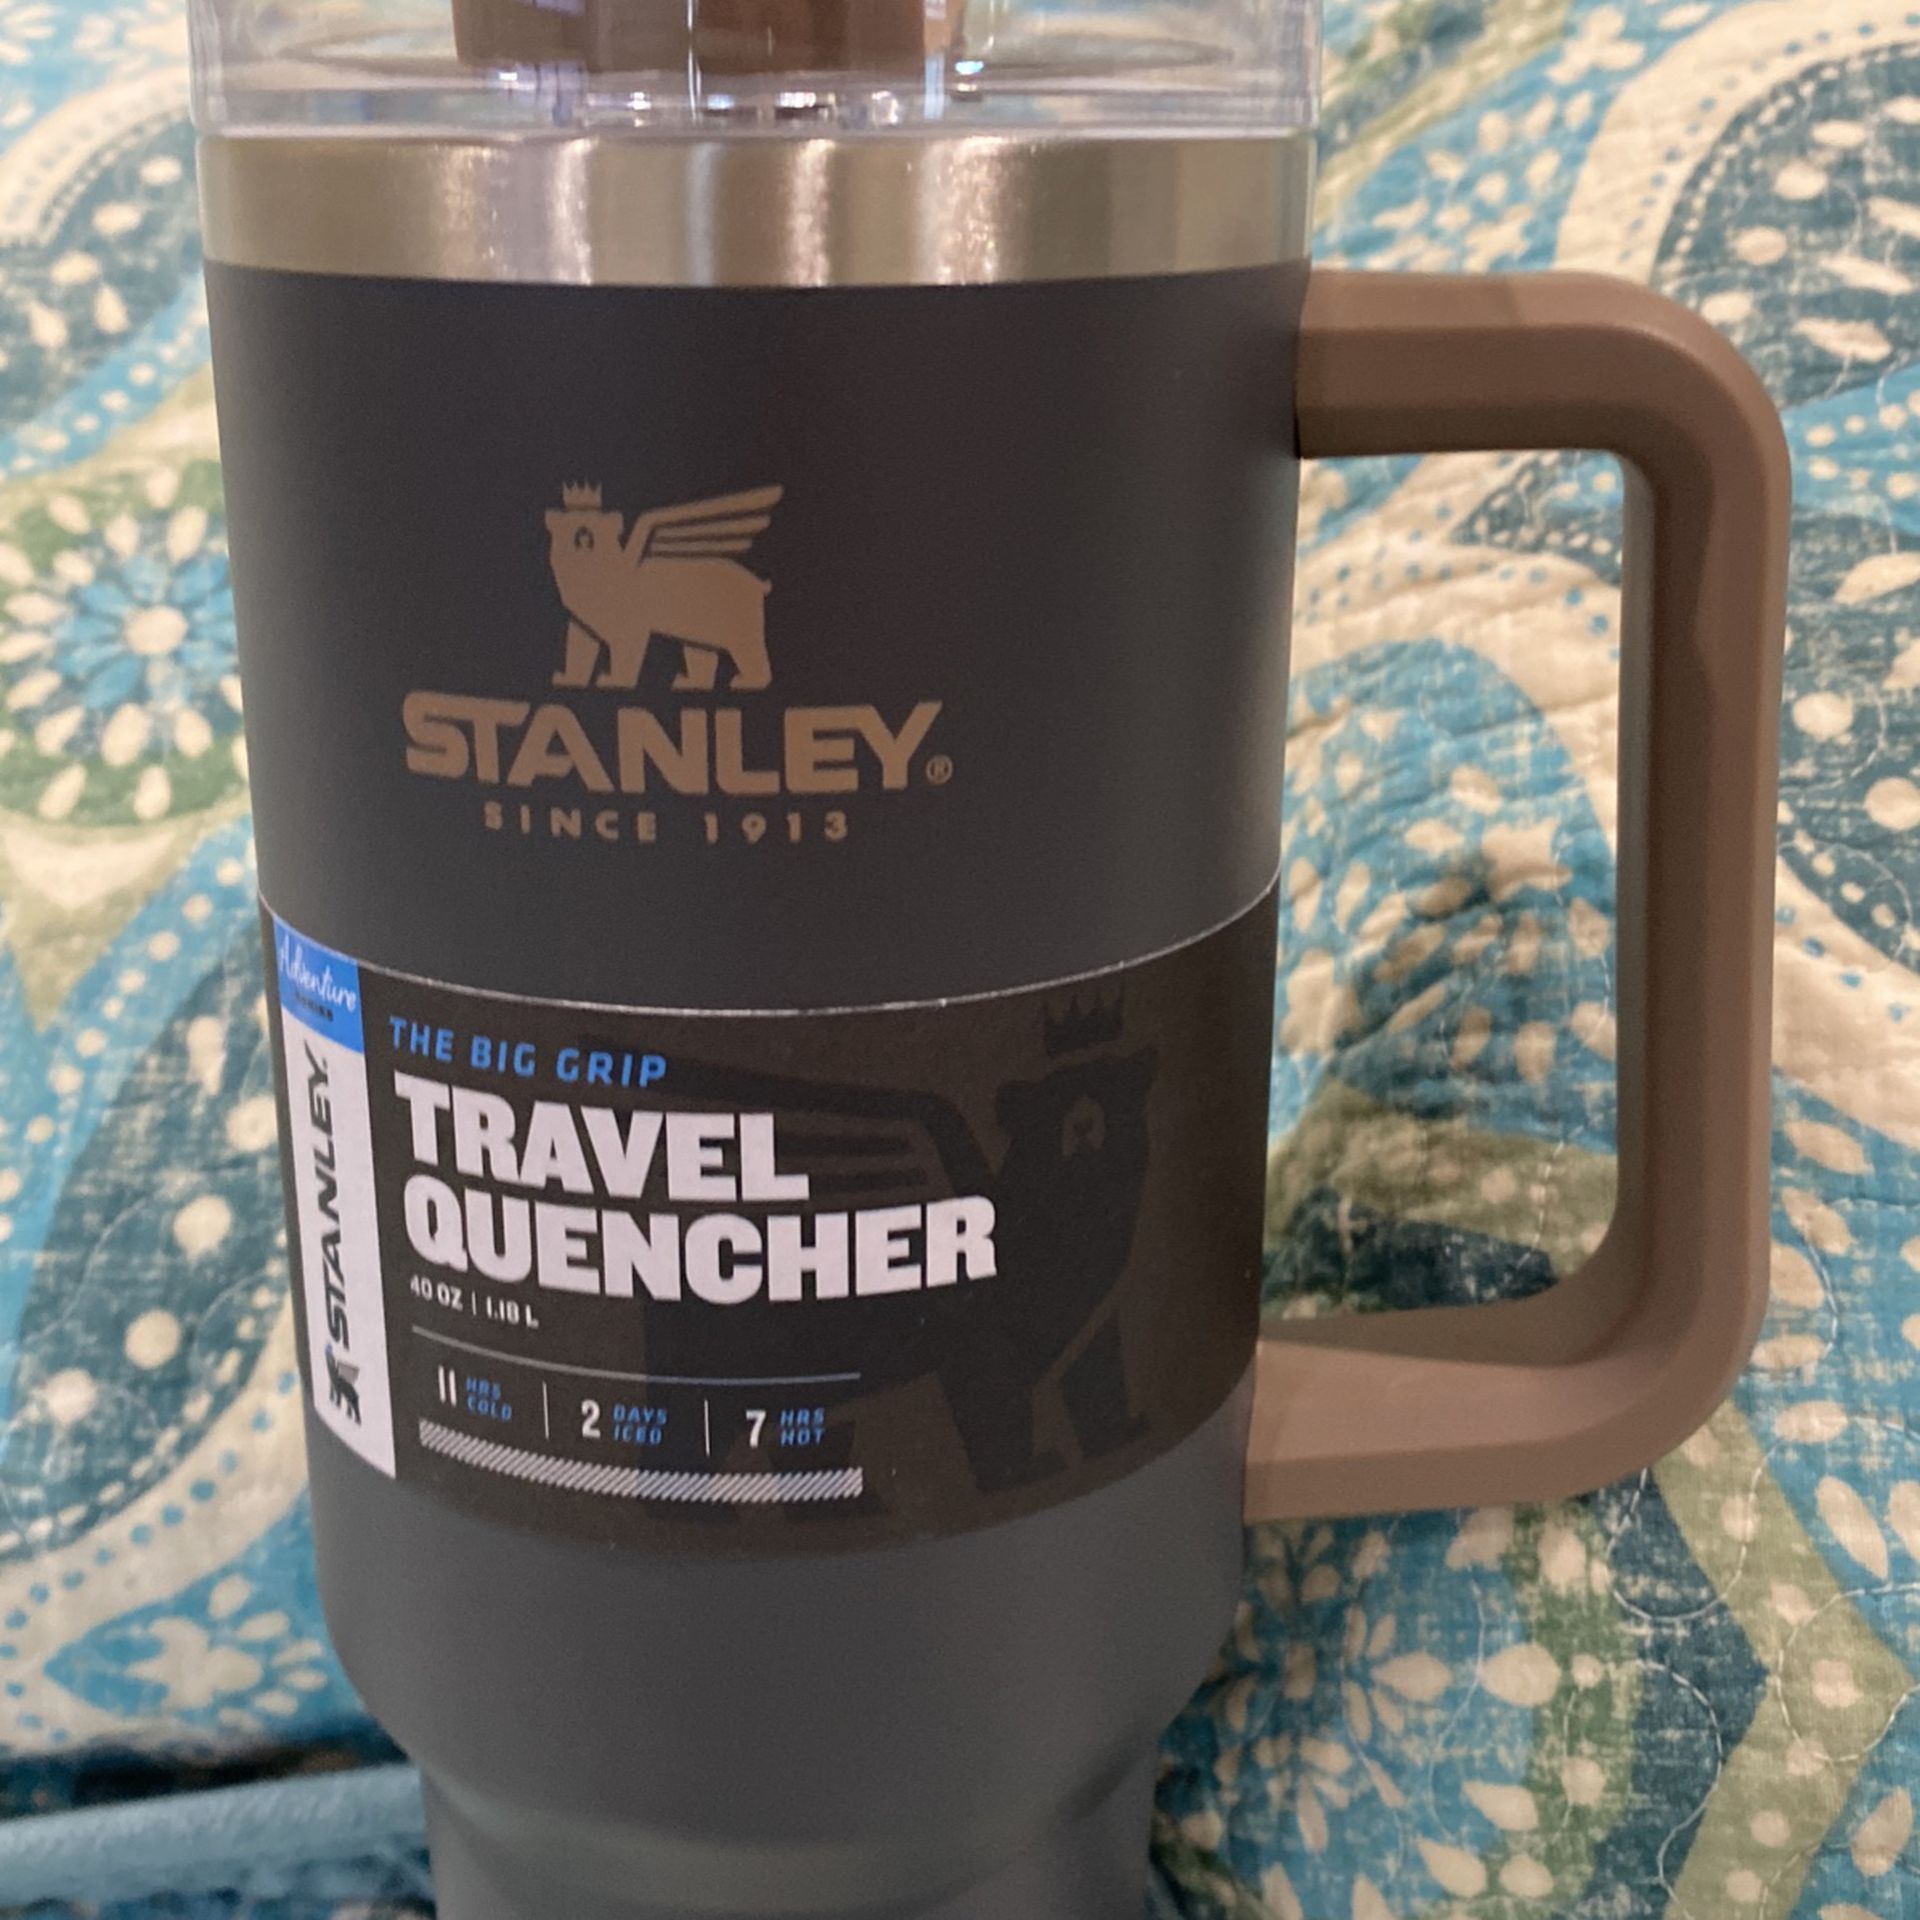 Stanley Cup 30 OZ Pink for Sale in Chula Vista, CA - OfferUp